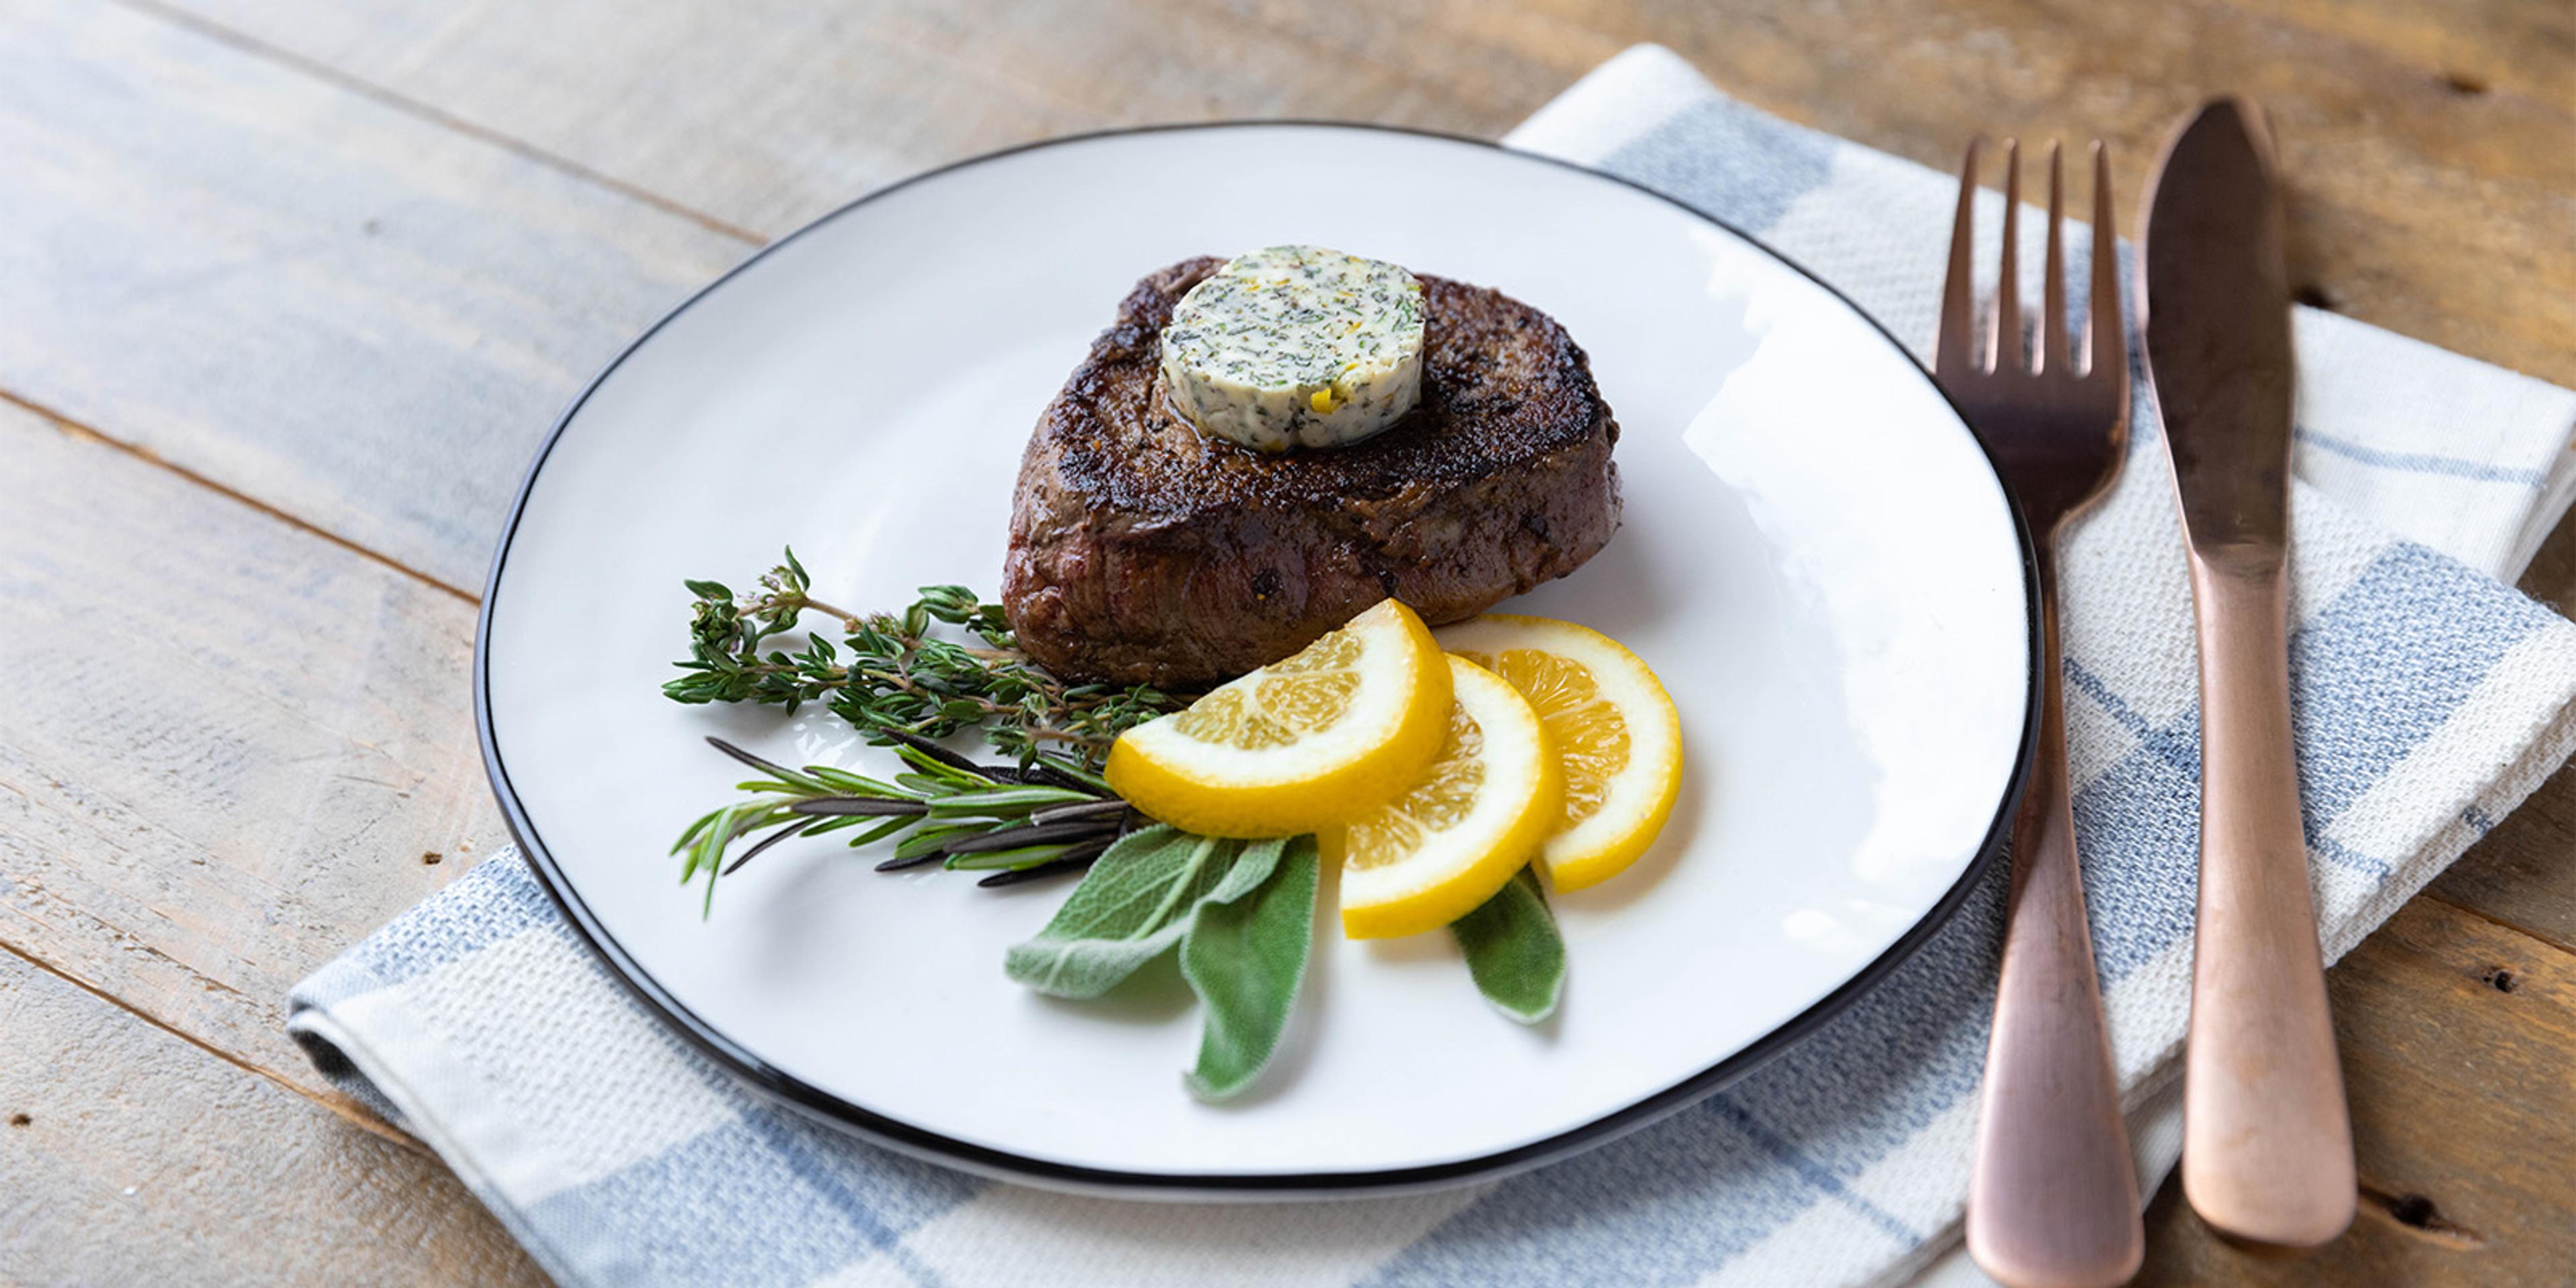 Herb Butter With Lemon Compound Butter on a steak garnished with fresh herbs.